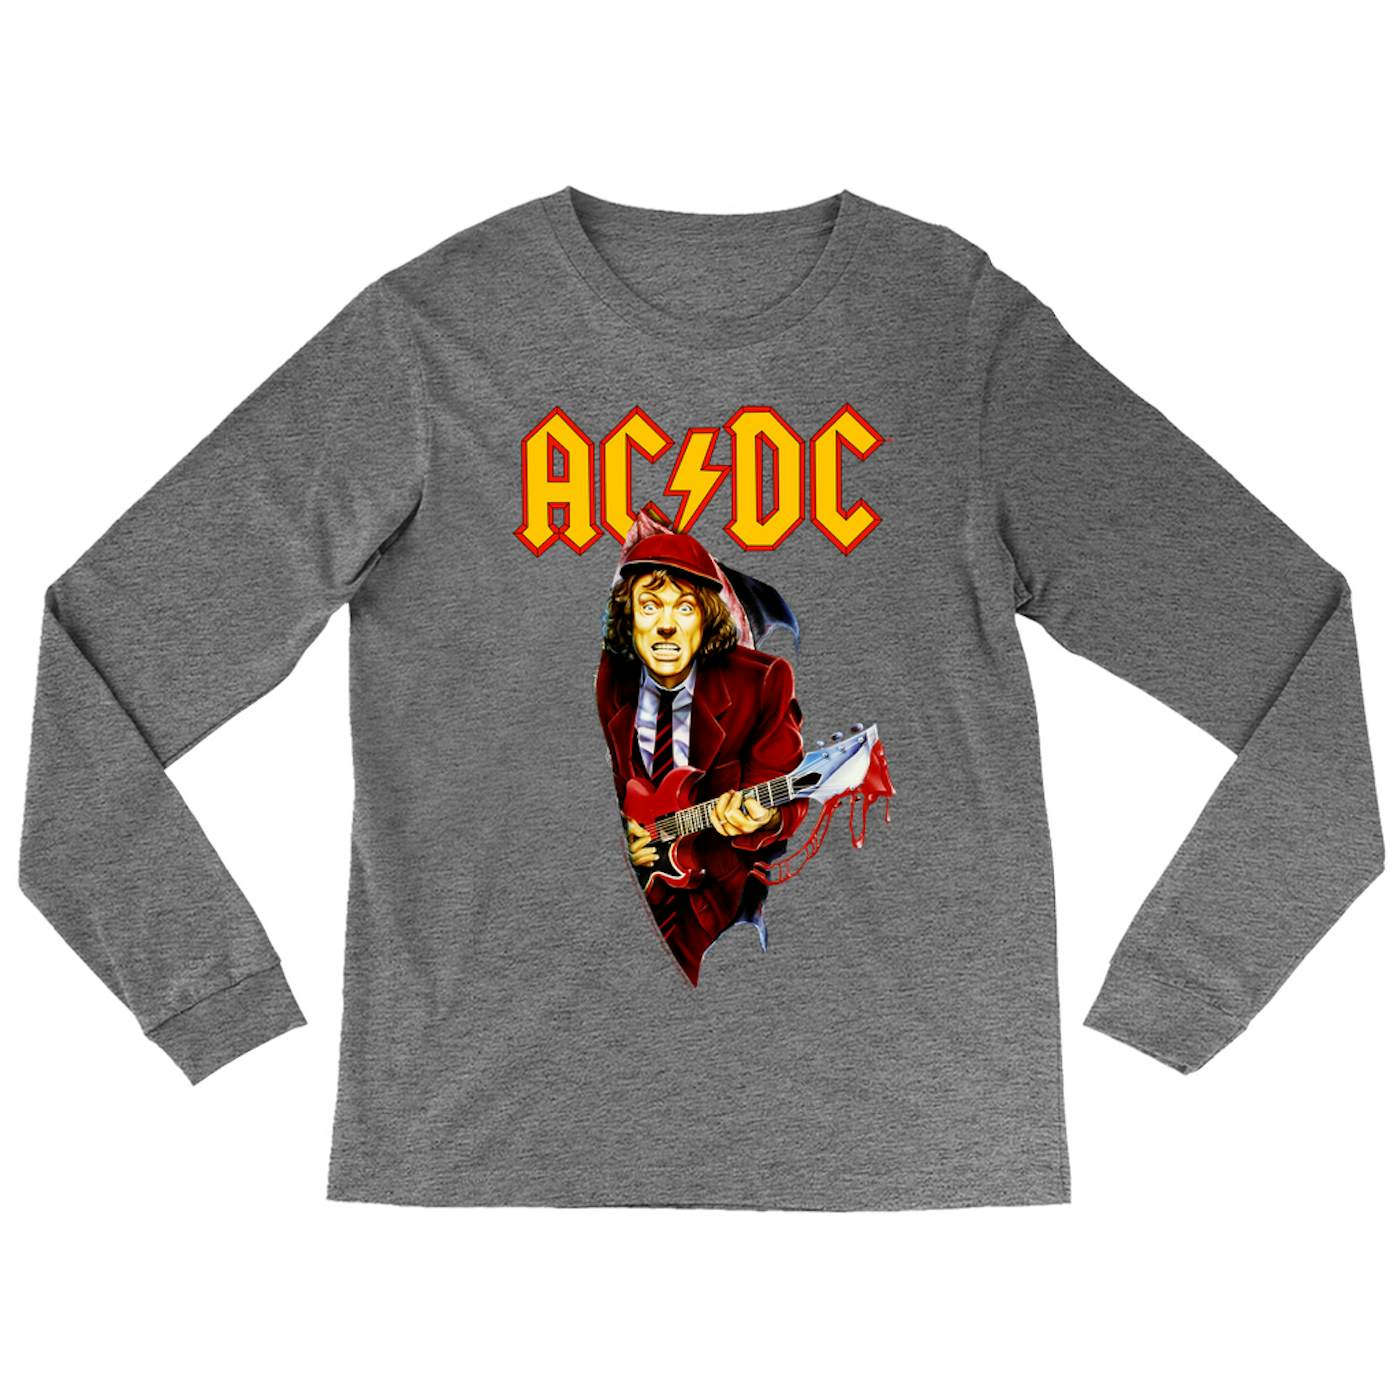 AC/DC Heather Long Sleeve Shirt | Angus Young With Bloody Guitar Design ACDC Shirt